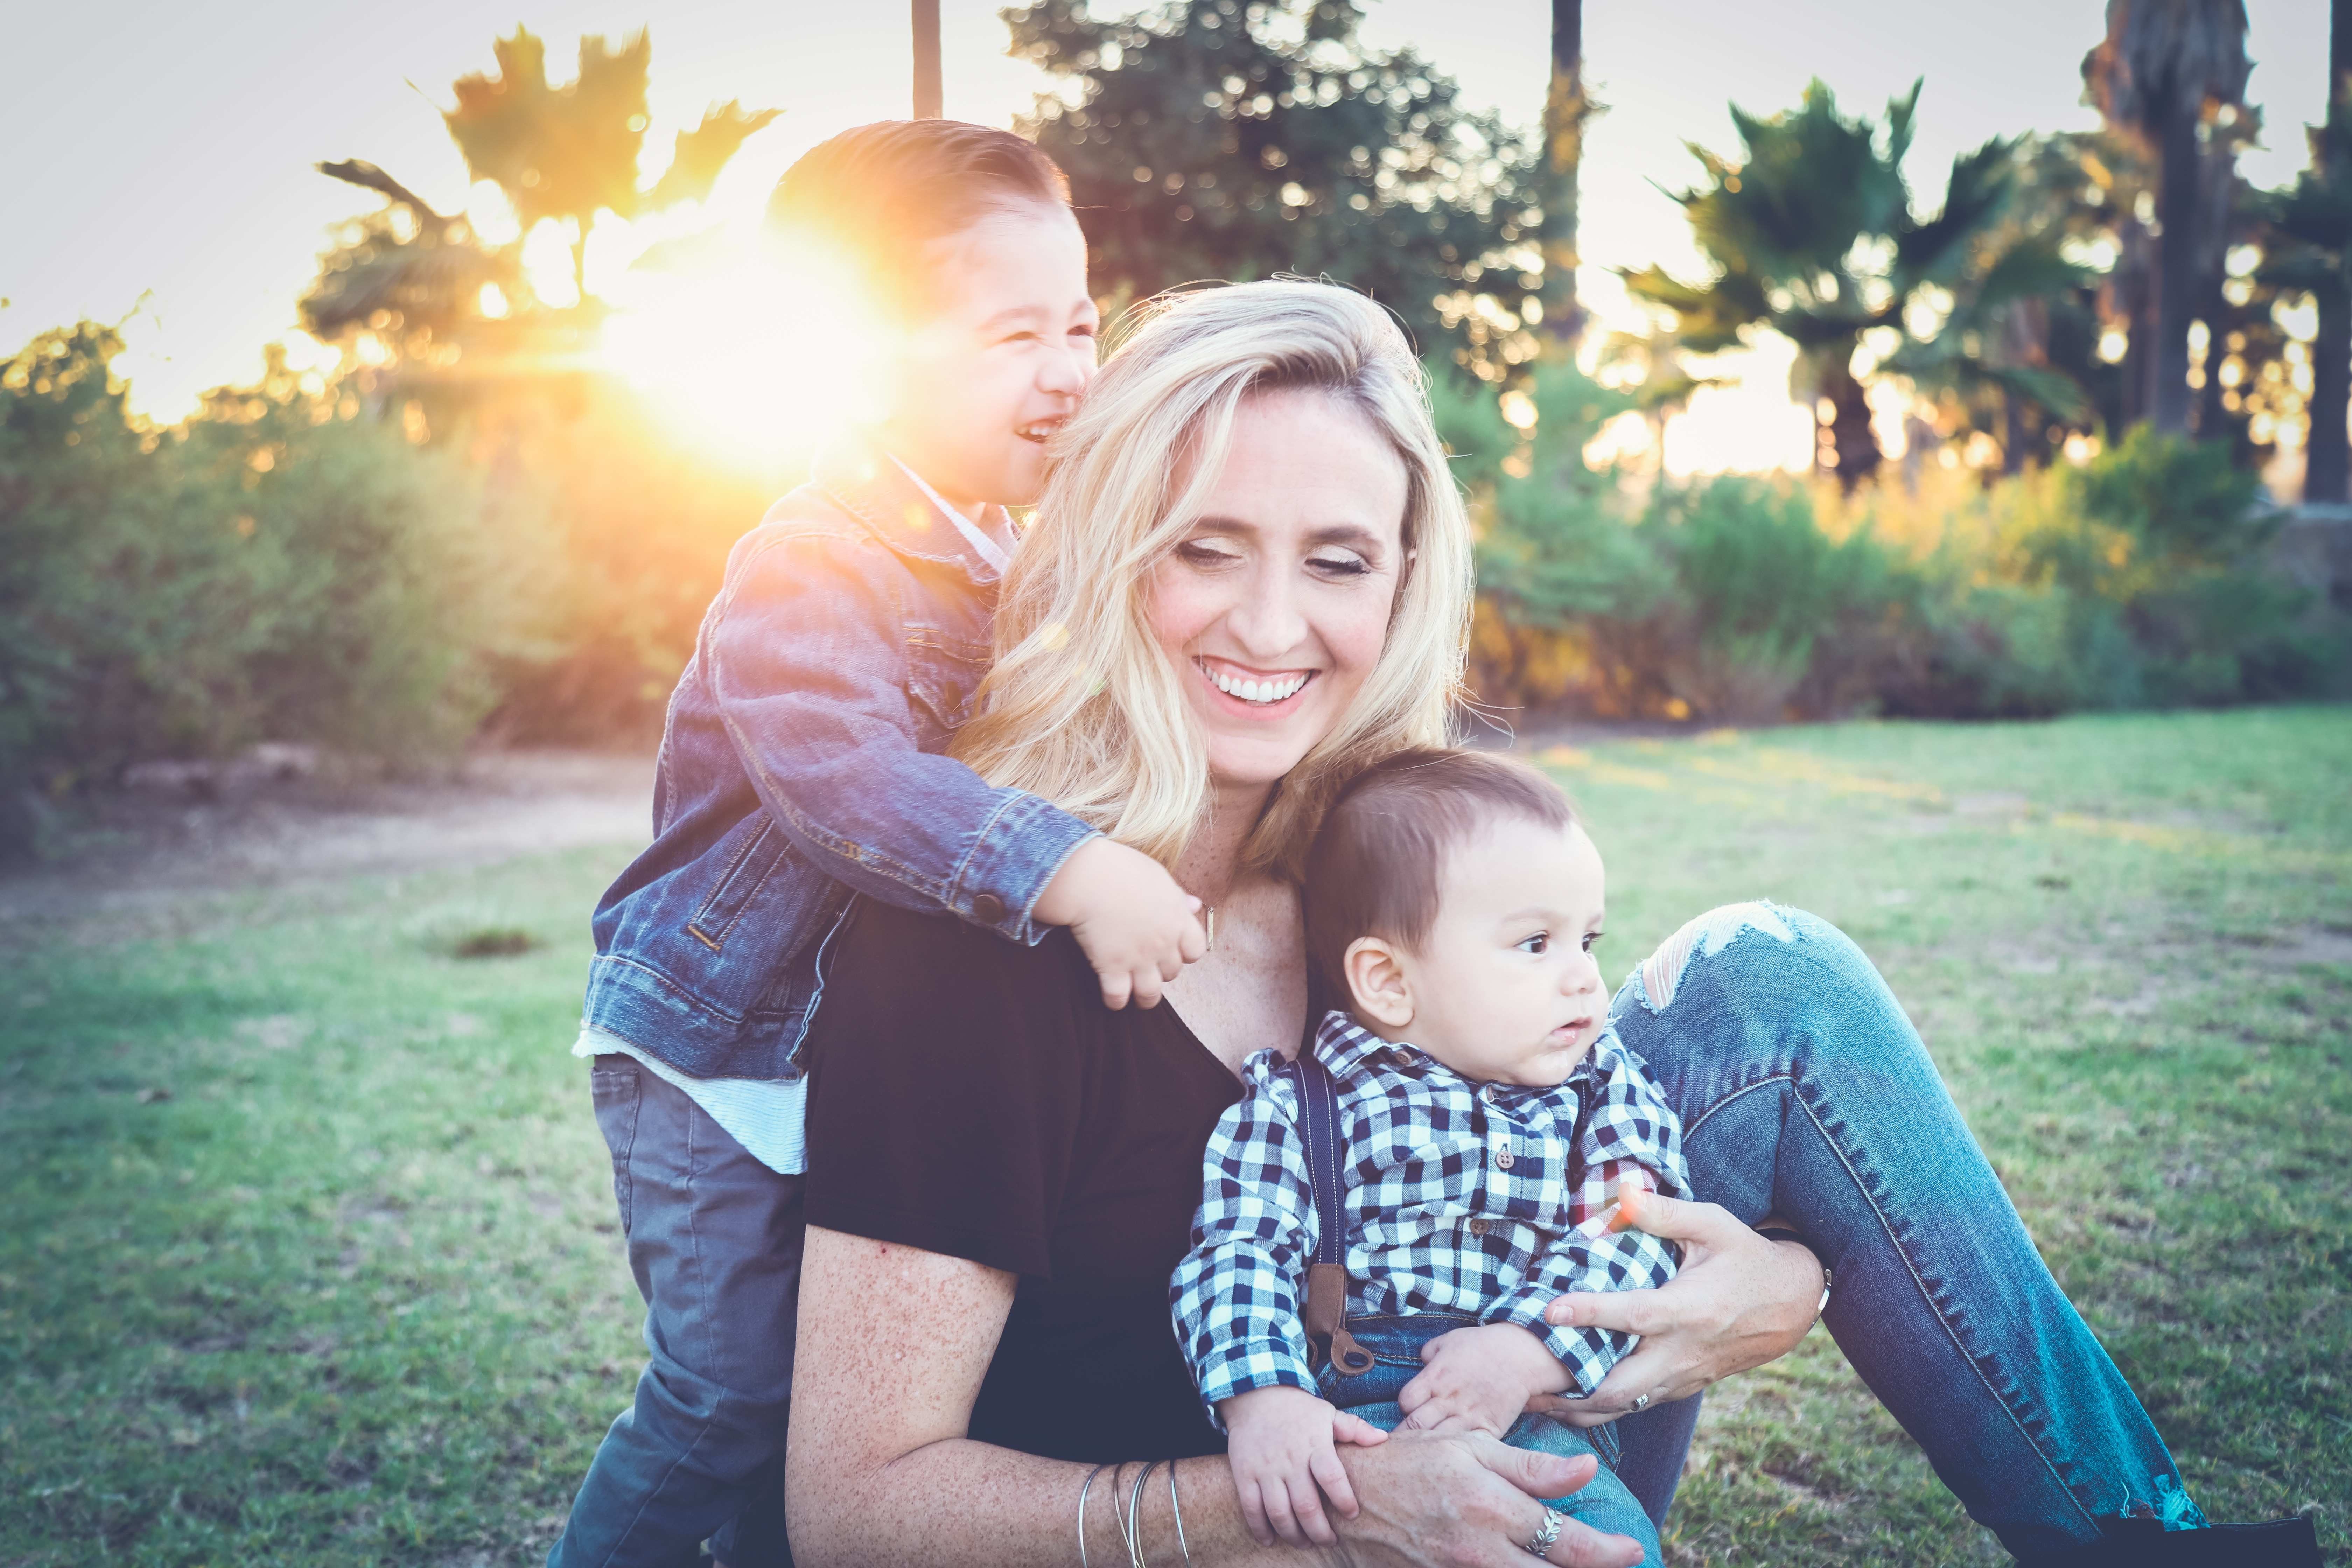 5 Boring New Mom Gifts That She'll Actually Love - The Soccer Mom Blog